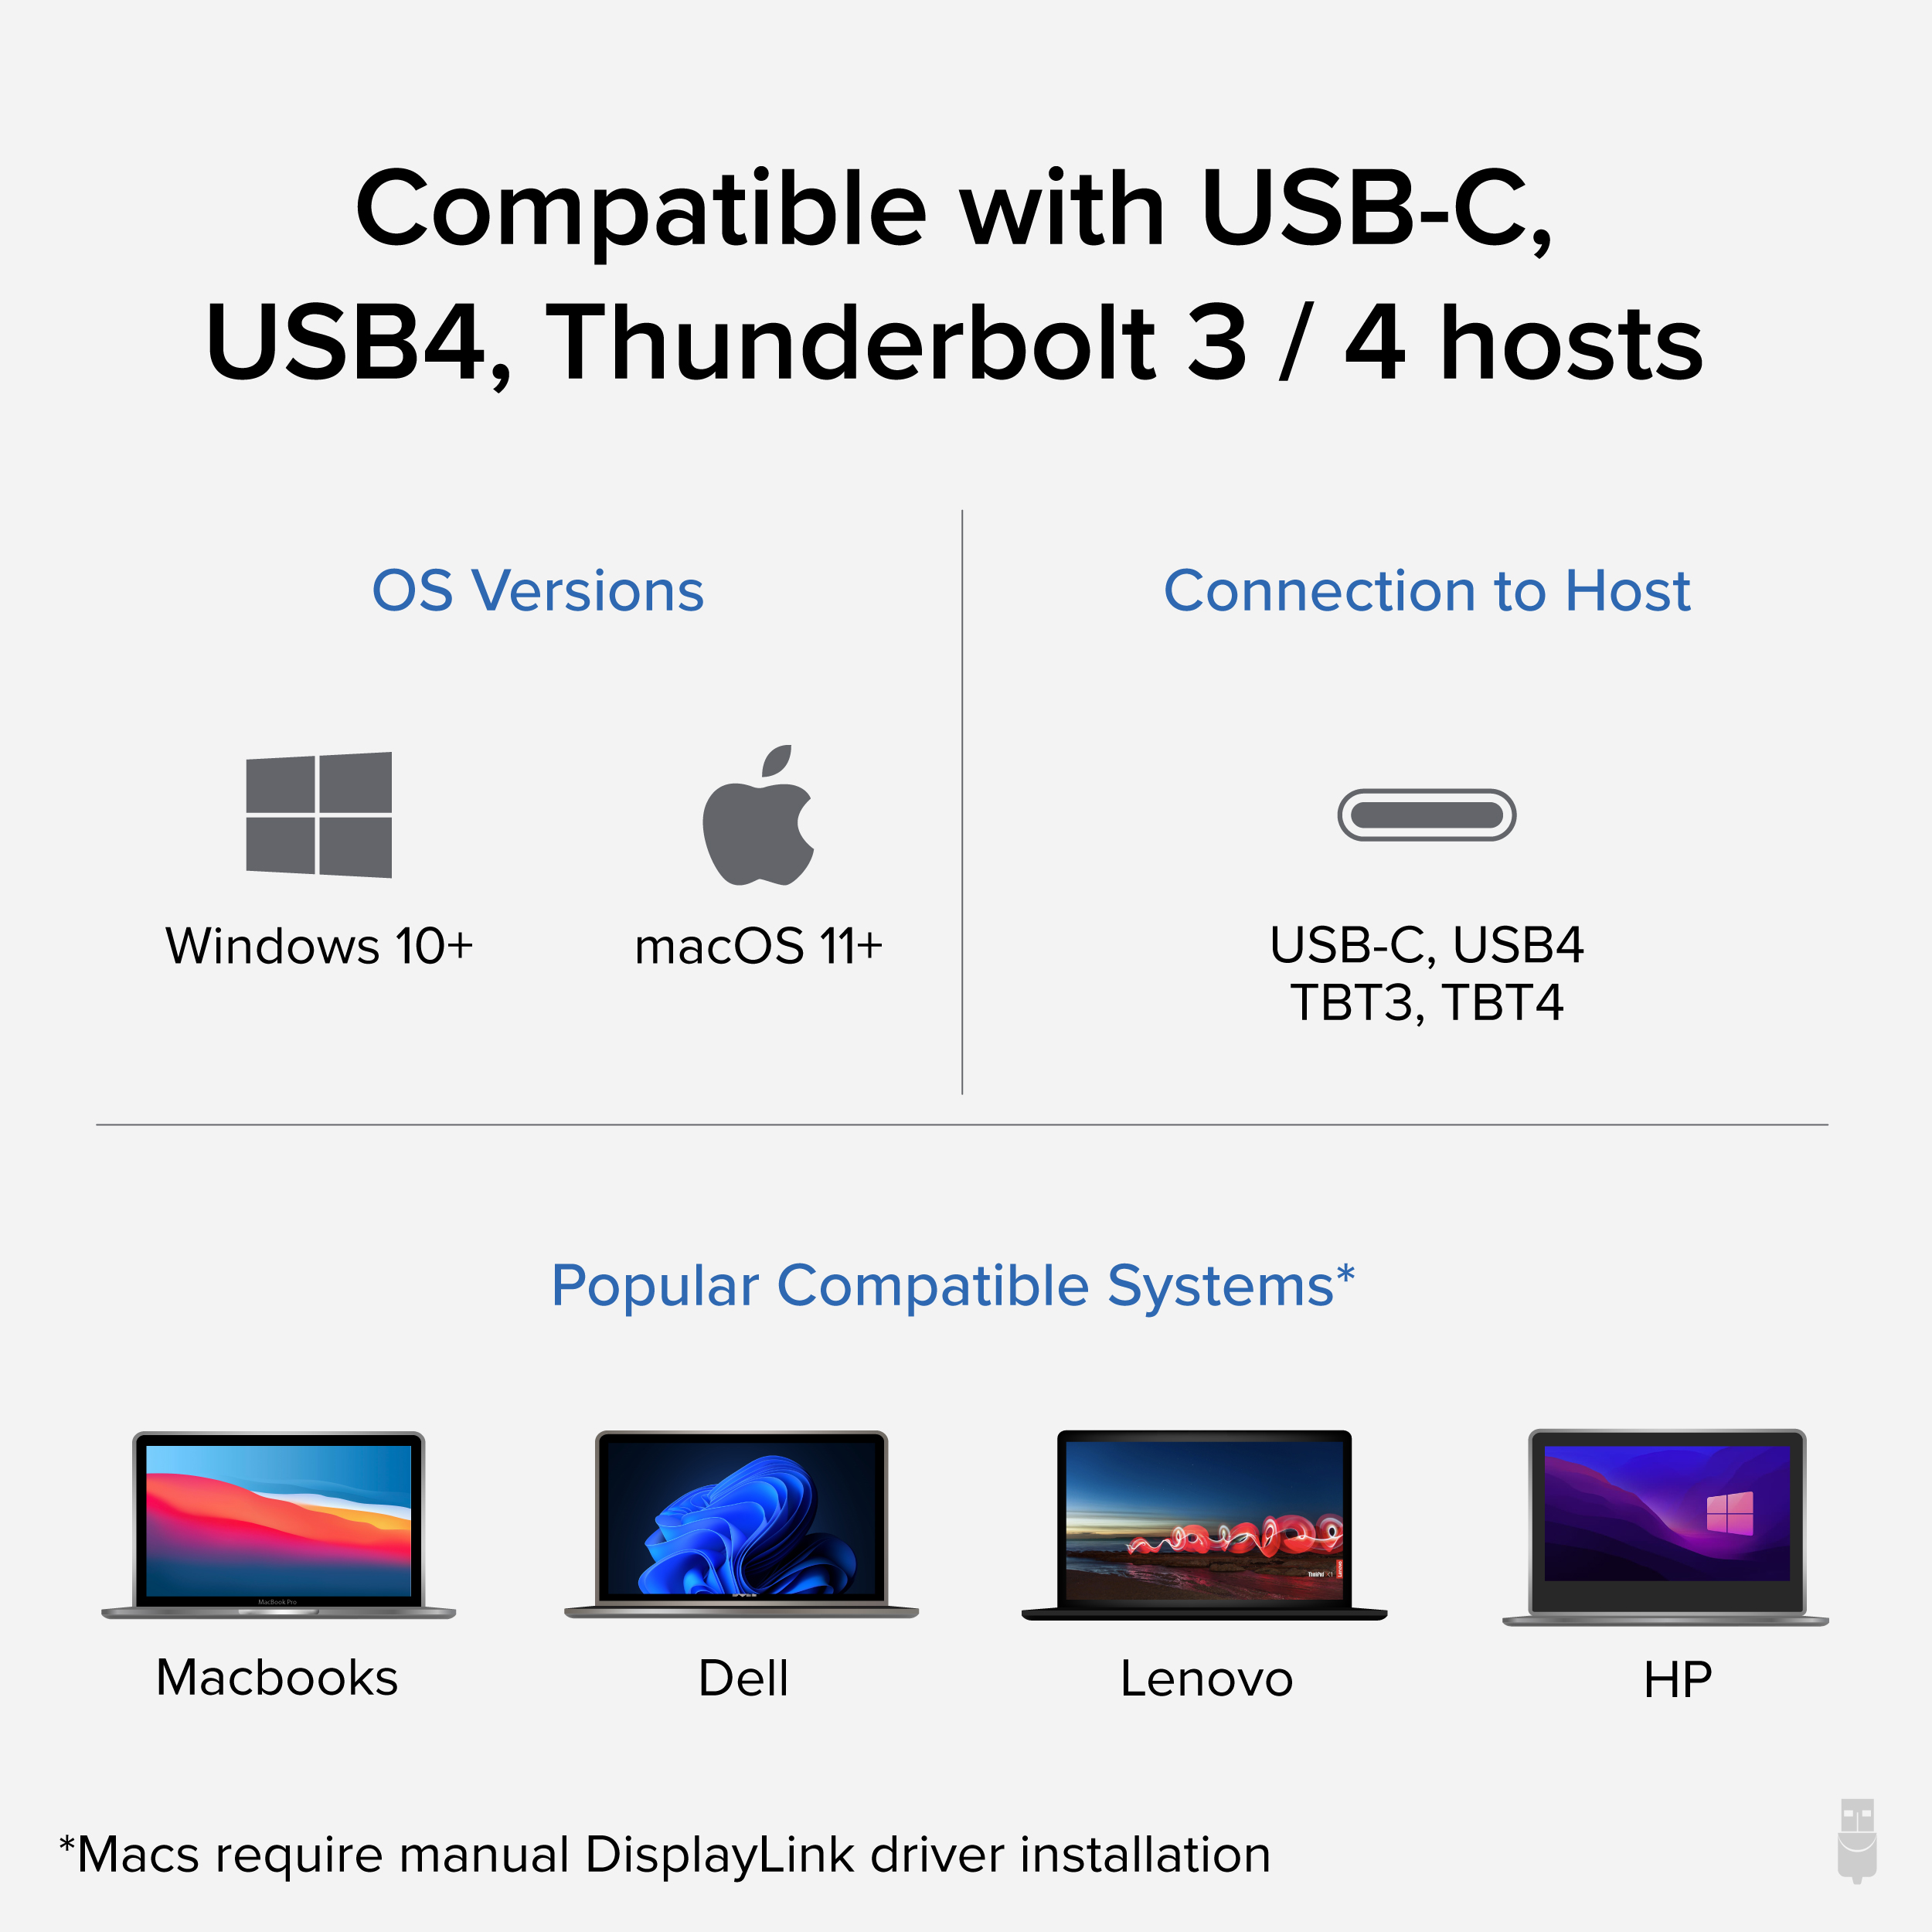 Plugable 7-in-1 USB C Docking Station Dual Monitor - Dual HDMI Dock is Compatible with Mac and Windows, USB4, Thunderbolt or USB-C, 100W PD, 2x HDMI, 1x USB-C, 1Gbps Ethernet, 1x USB 3.0, 1x SD Card - image 4 of 8